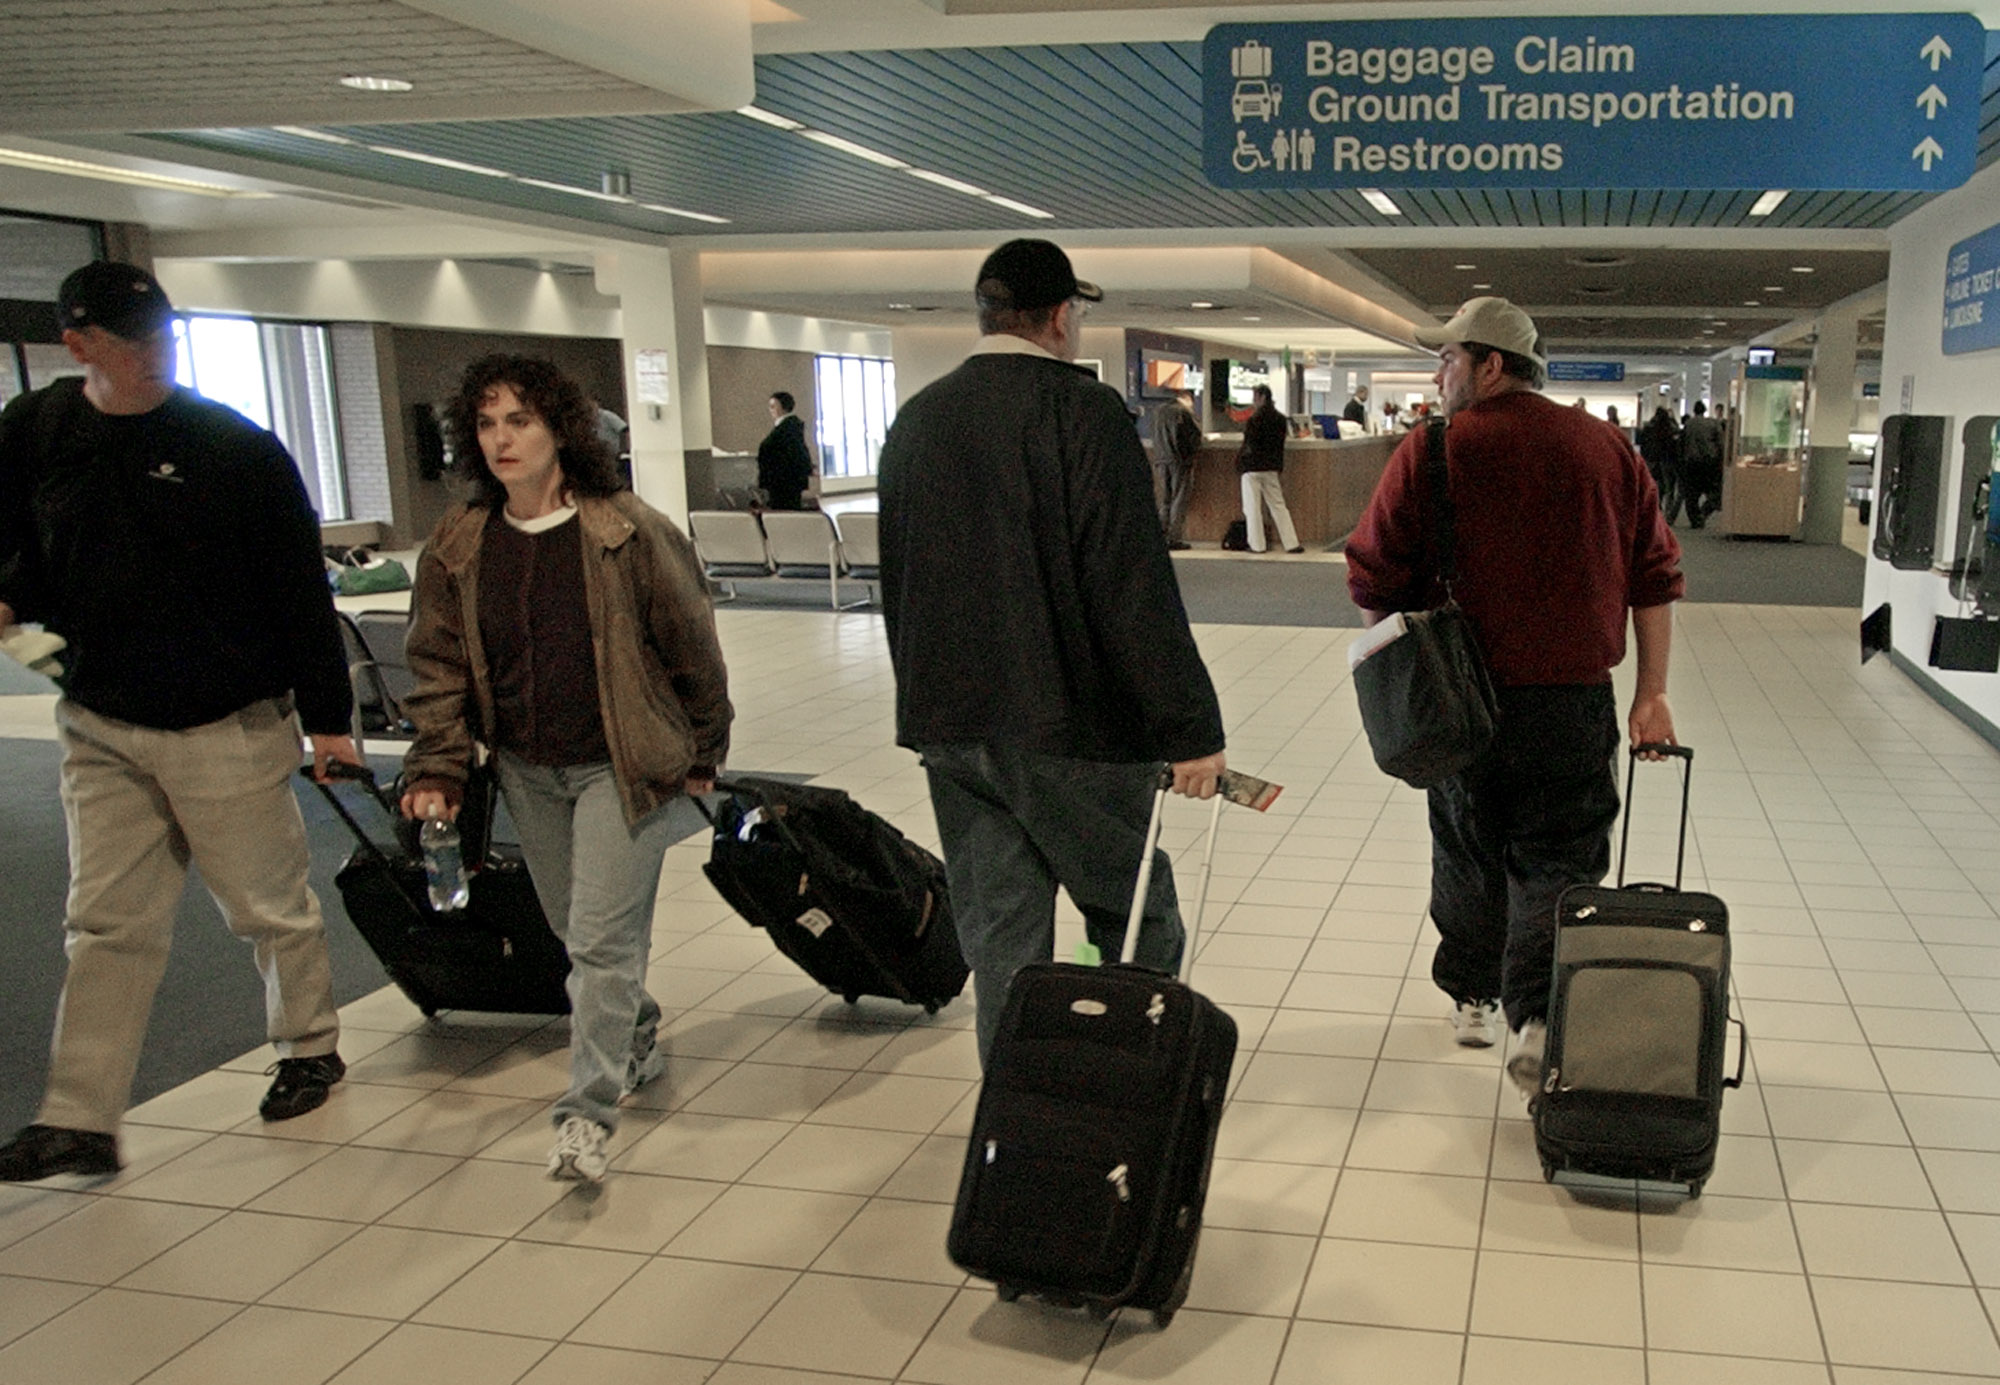 People walking in an airport